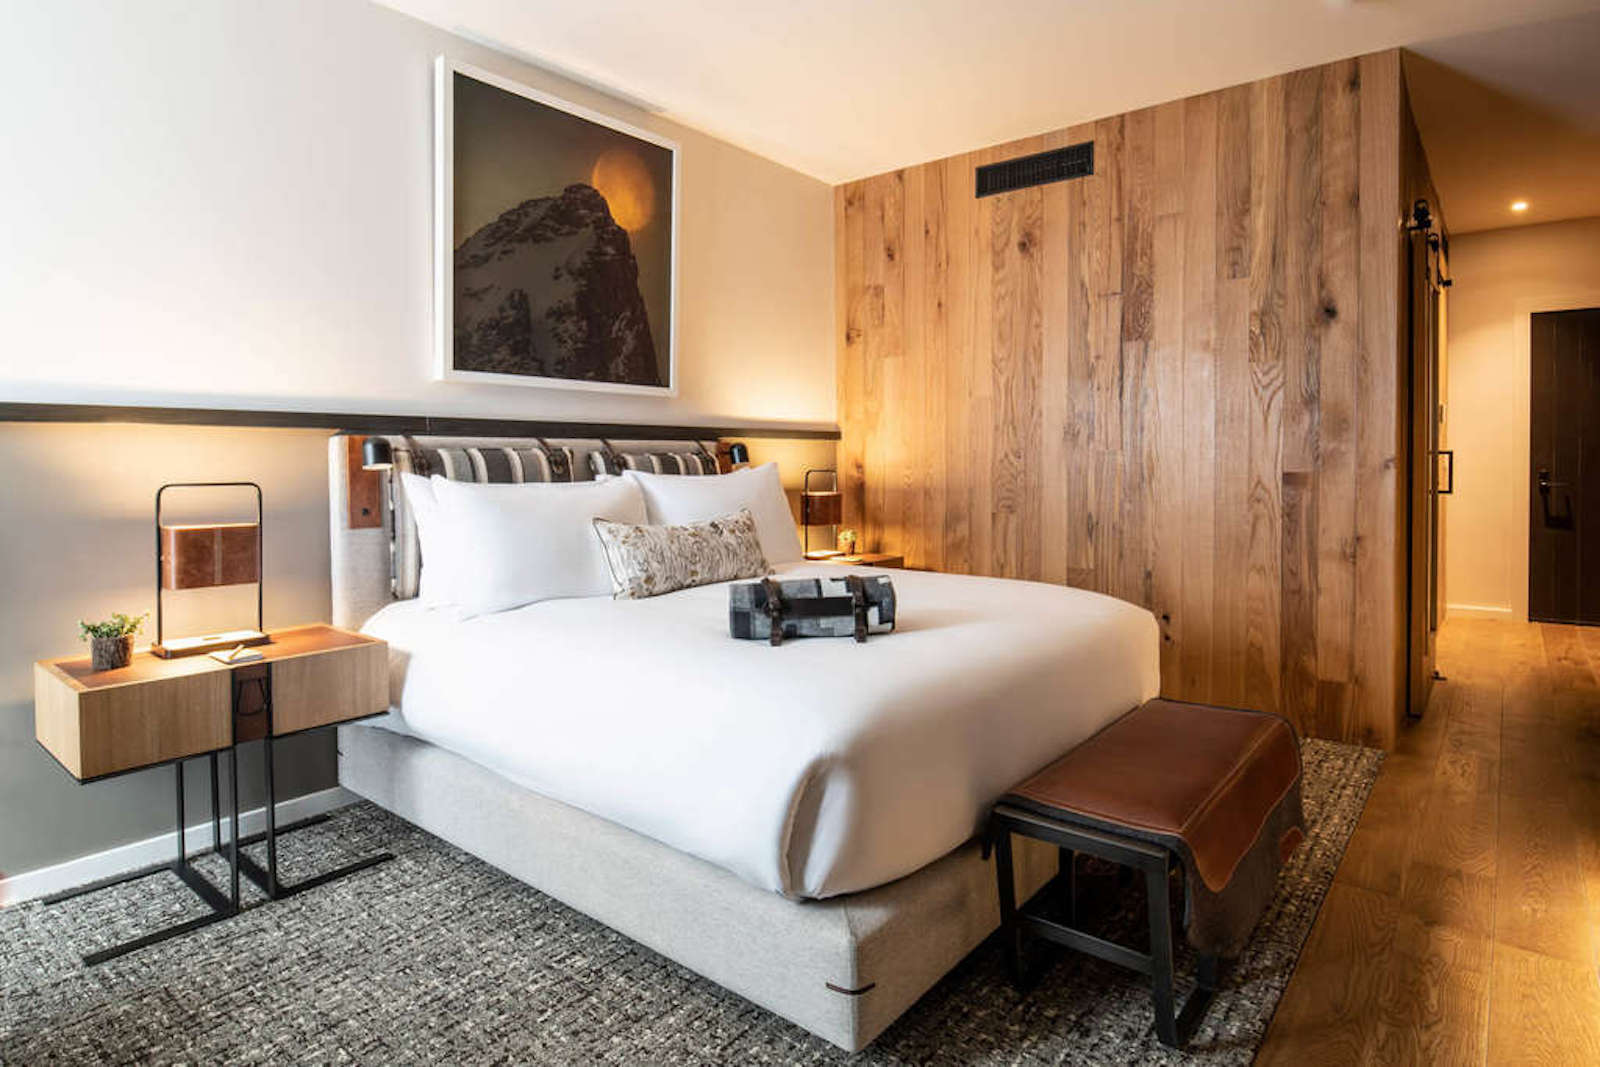 A hotel room with a wooden wall, a bed and a photo of a mountain above the bed